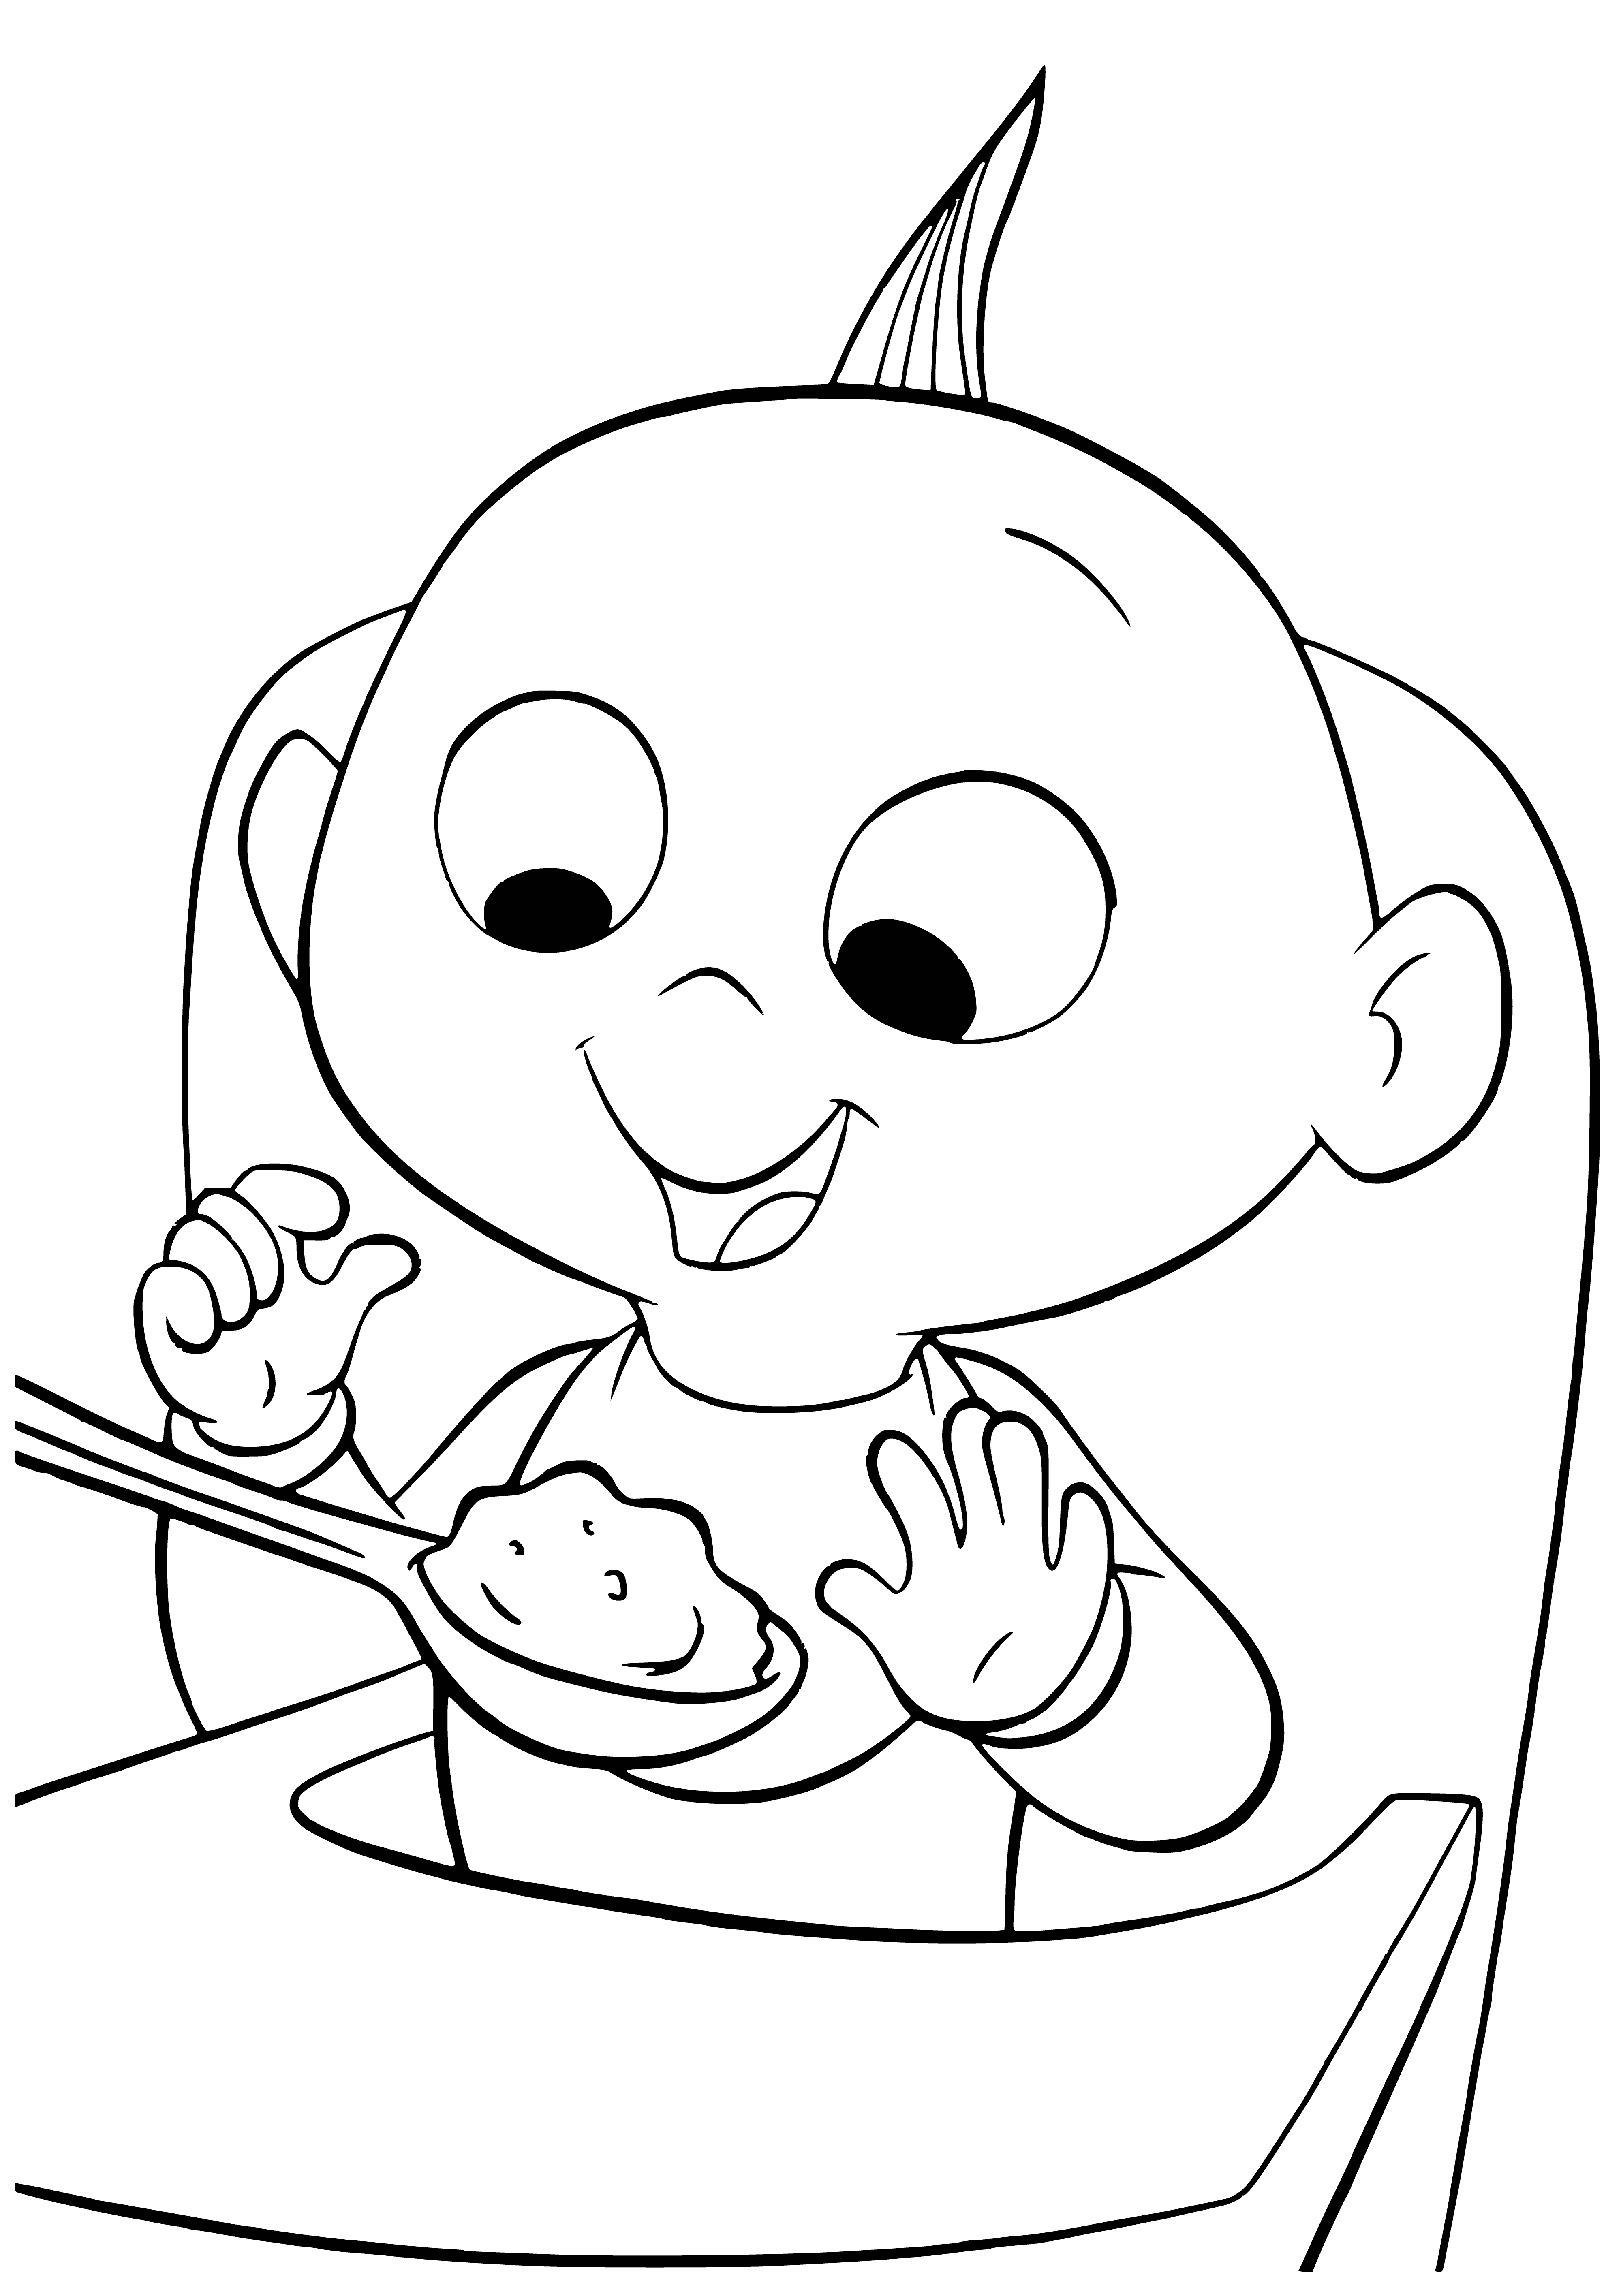 coloring page: Jack-Jack is happy and content eating dinner in his high chair with a bib and spoon.